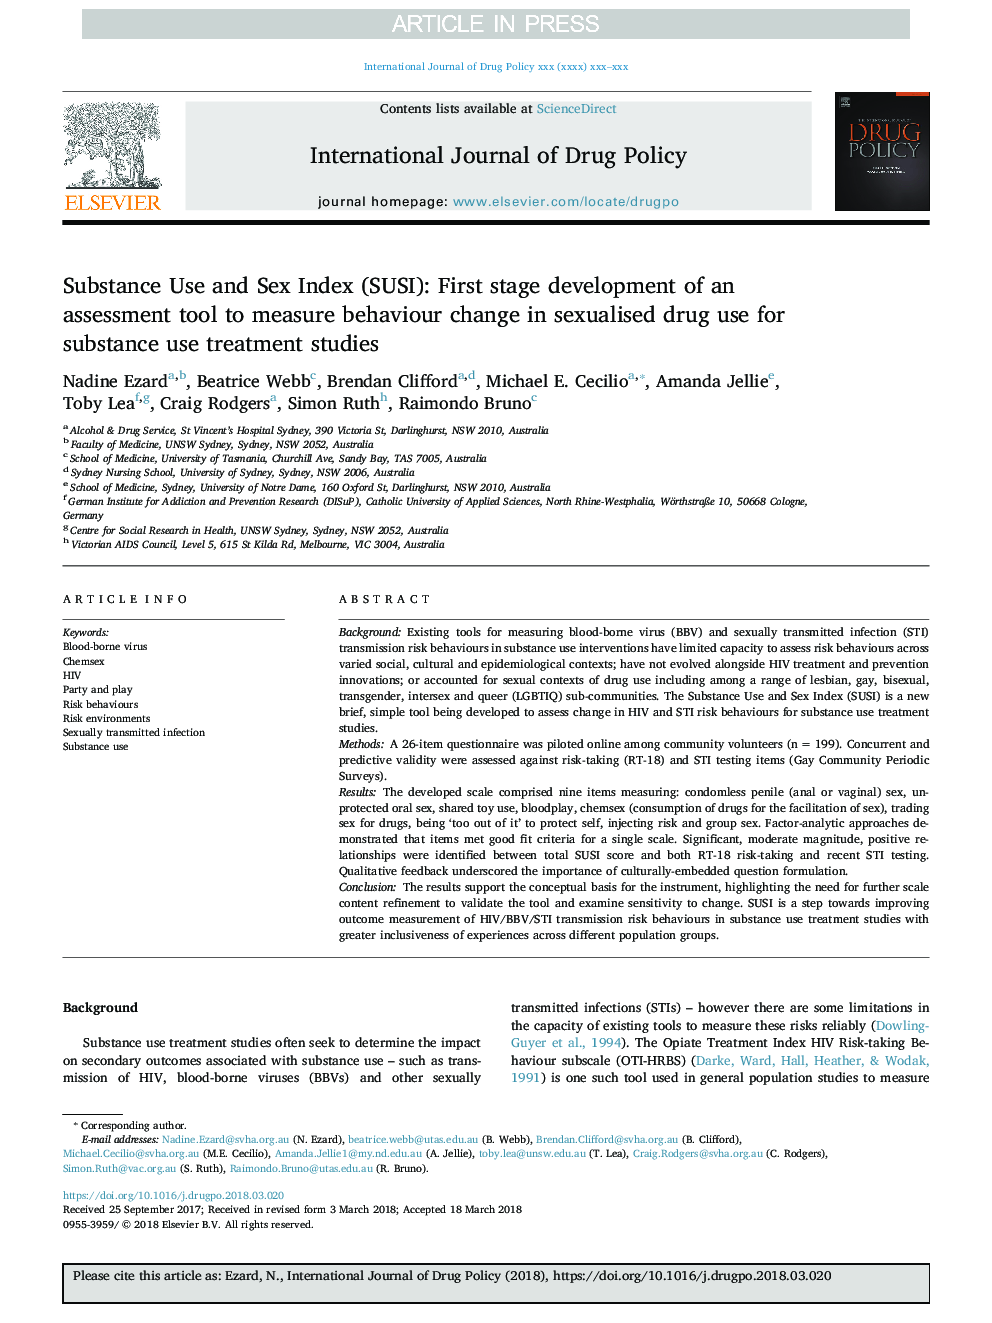 Substance Use and Sex Index (SUSI): First stage development of an assessment tool to measure behaviour change in sexualised drug use for substance use treatment studies